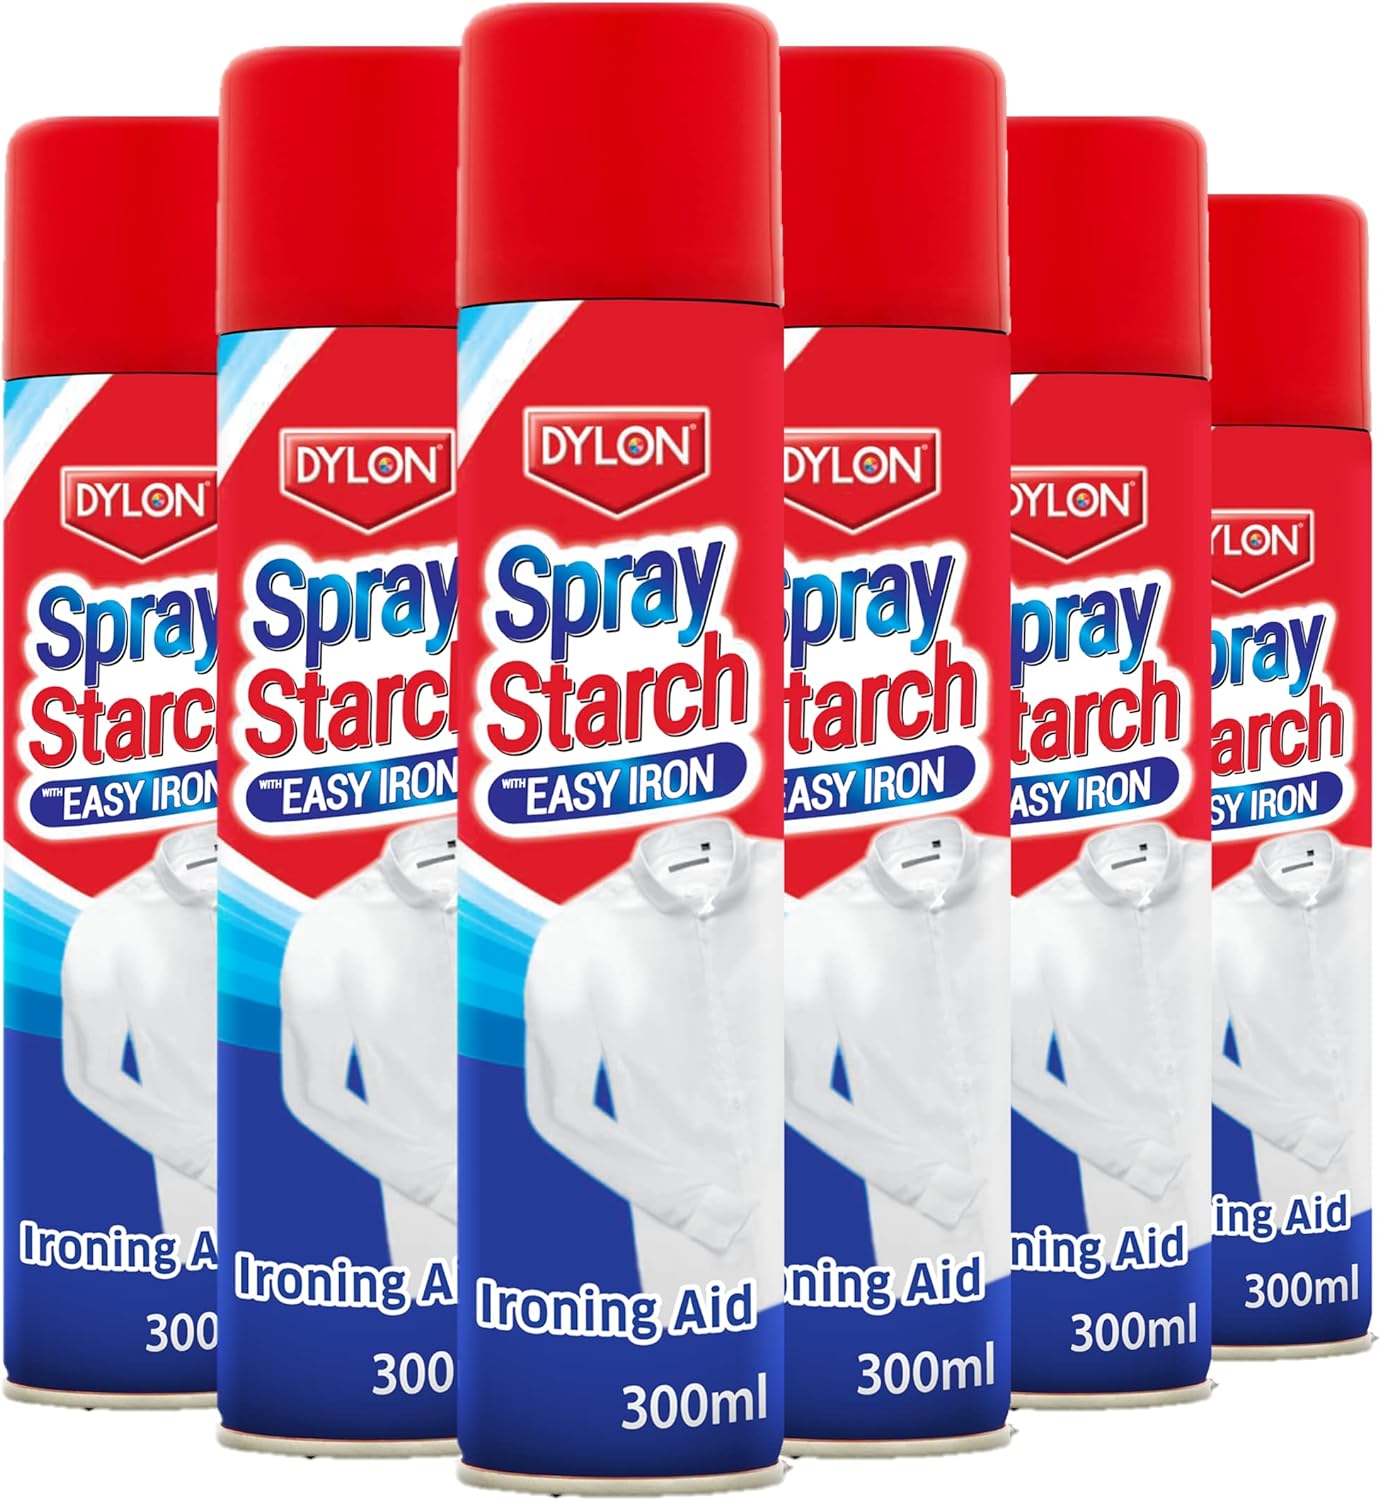 Dylon 2-in-1 Starch Spray with Easy Iron, Ironing Aid Helps Remove Creases - 300 ml (Pack of 6)